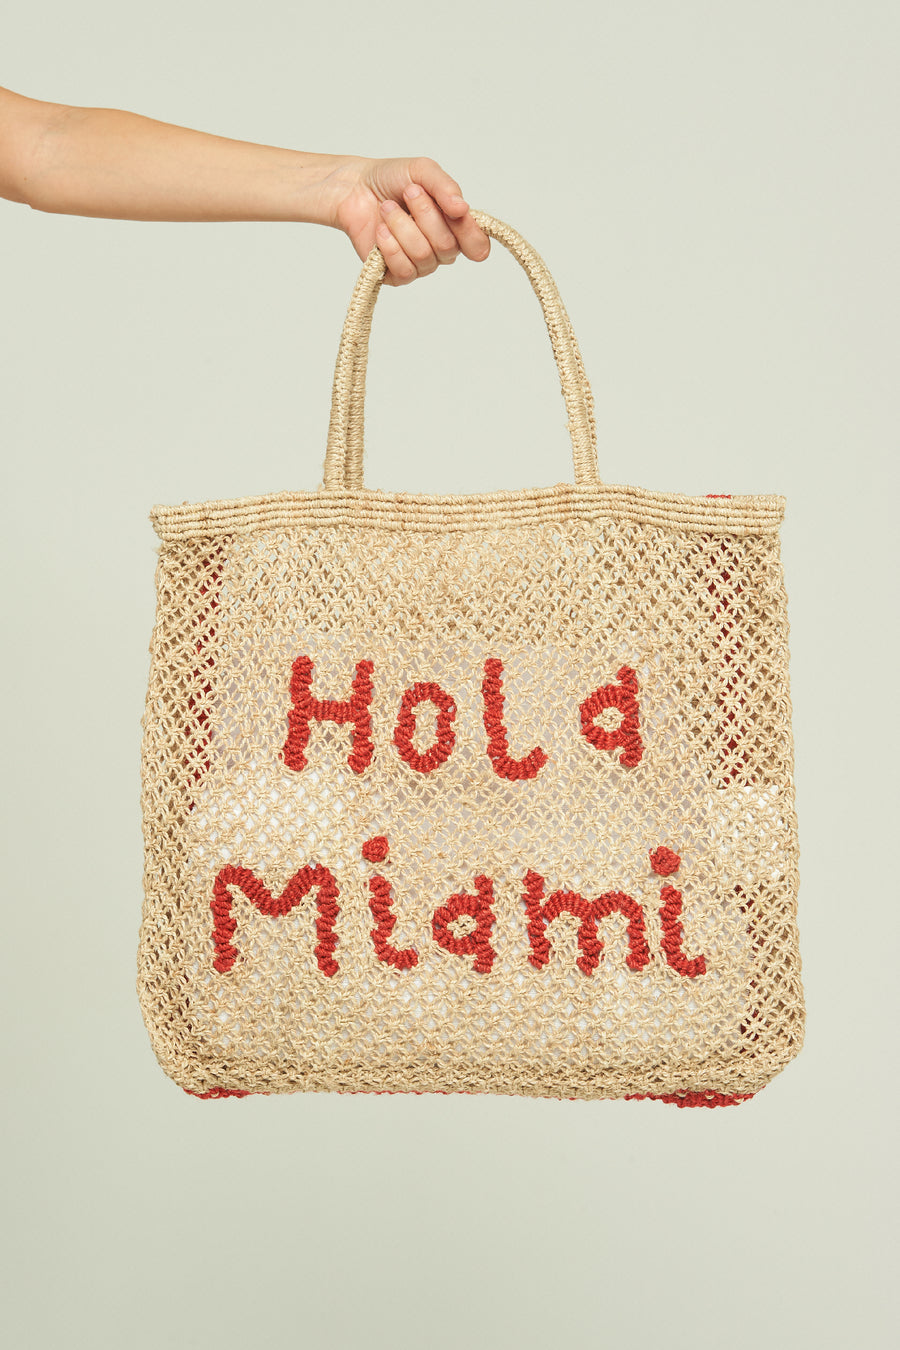 Ingredients for a Beautiful Life!The Jacksons Hola Jute Bag Red